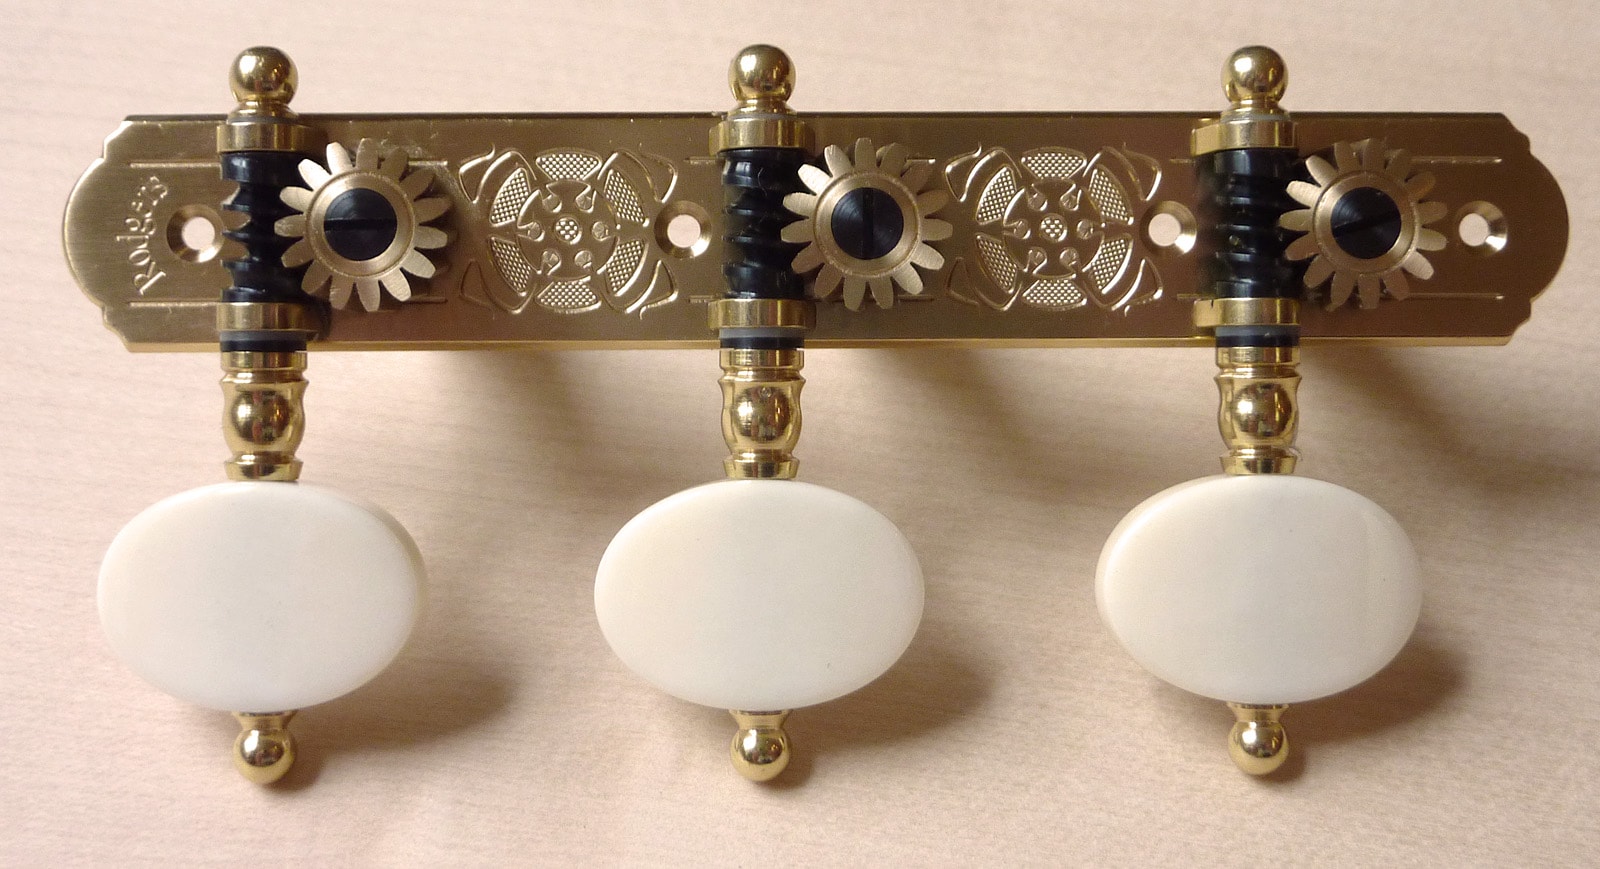 Buttons - Rodgers Tuning Machines